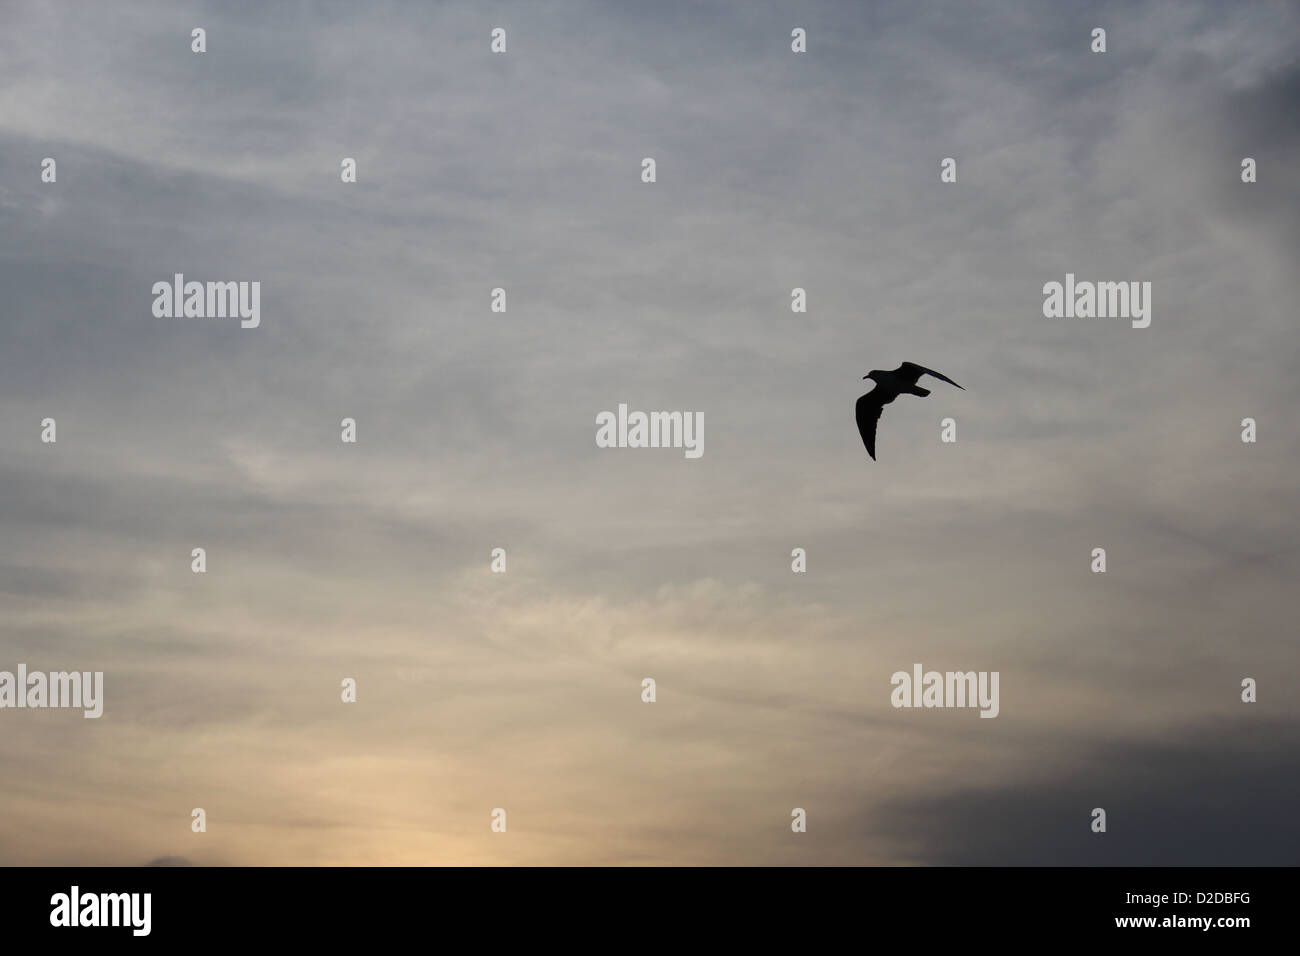 A beautifully crisp silhouette of a bird amongst the textured skyline of, Africa. Stock Photo